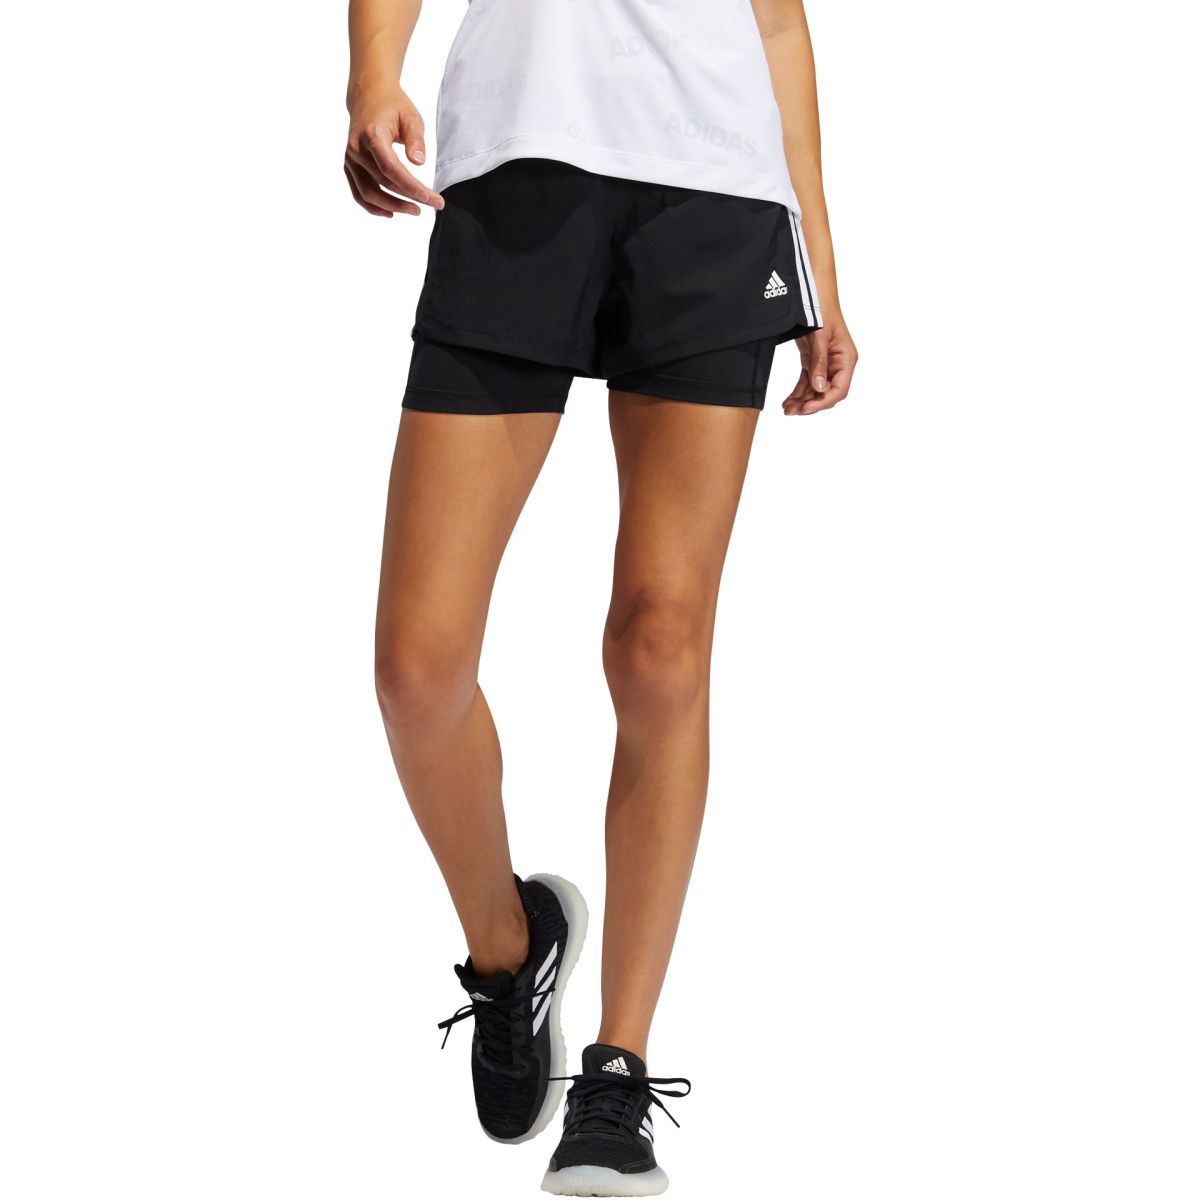 adidas Pacer 3-Stripes 2 in 1 Women's Running Tight Shorts G